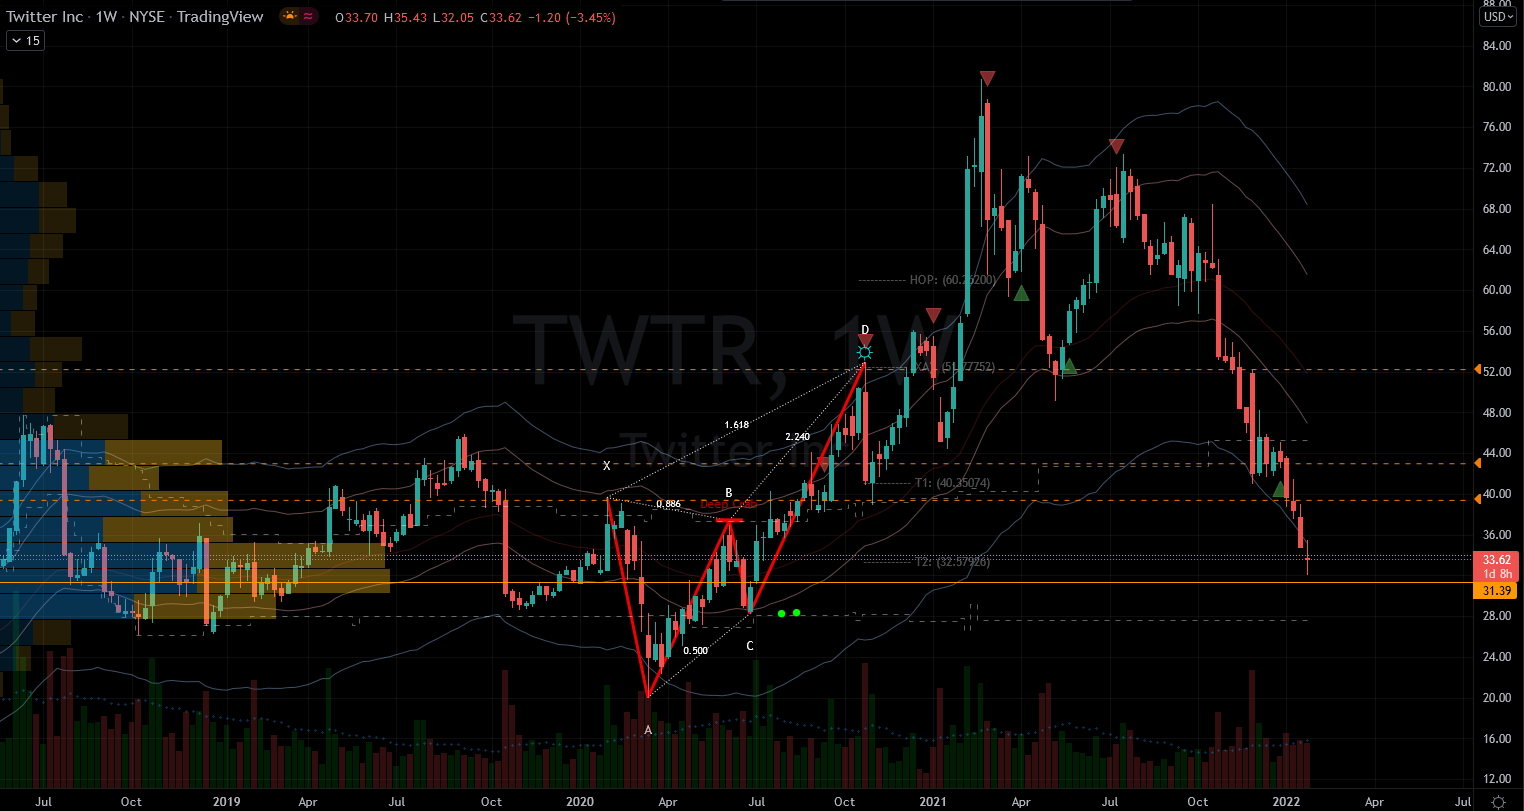 Stocks to Buy: Twitter (TWTR) Stock Chart Showing Potential Base